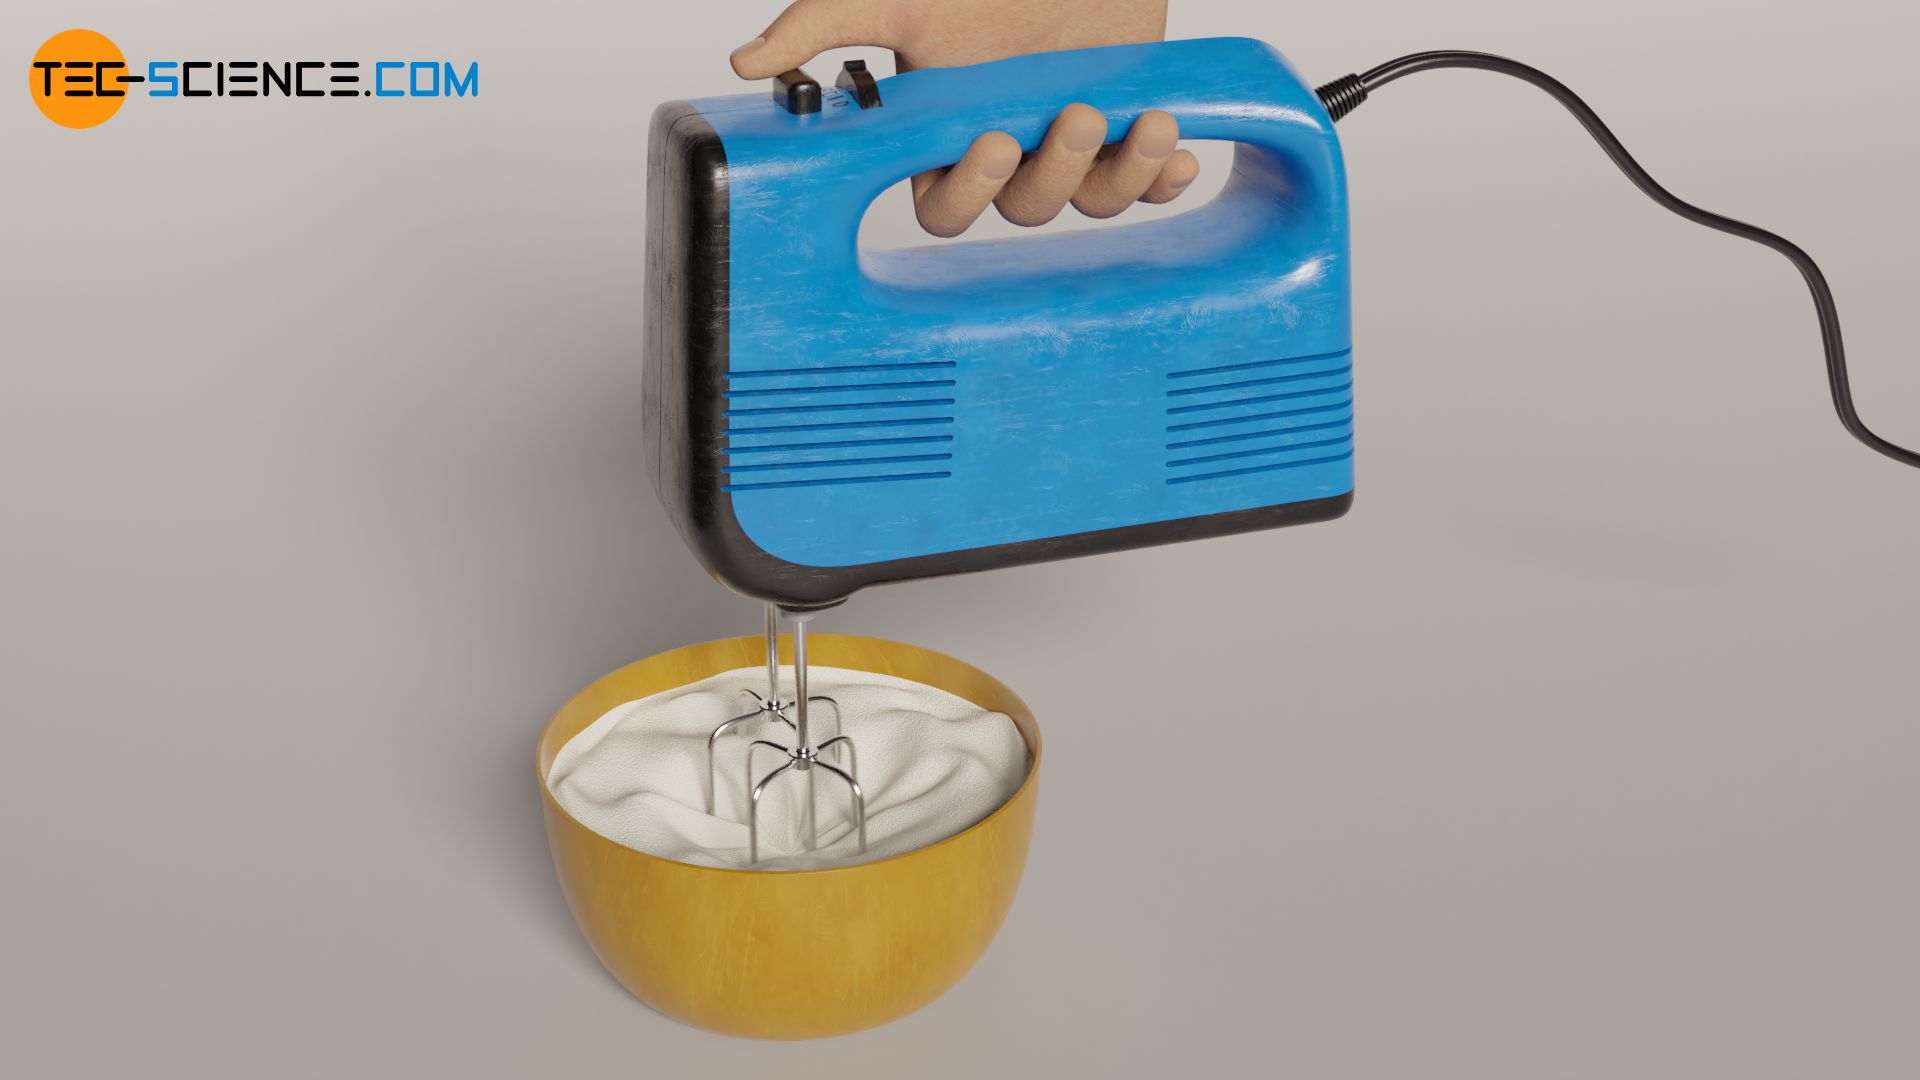 Whipping cream with a mixer